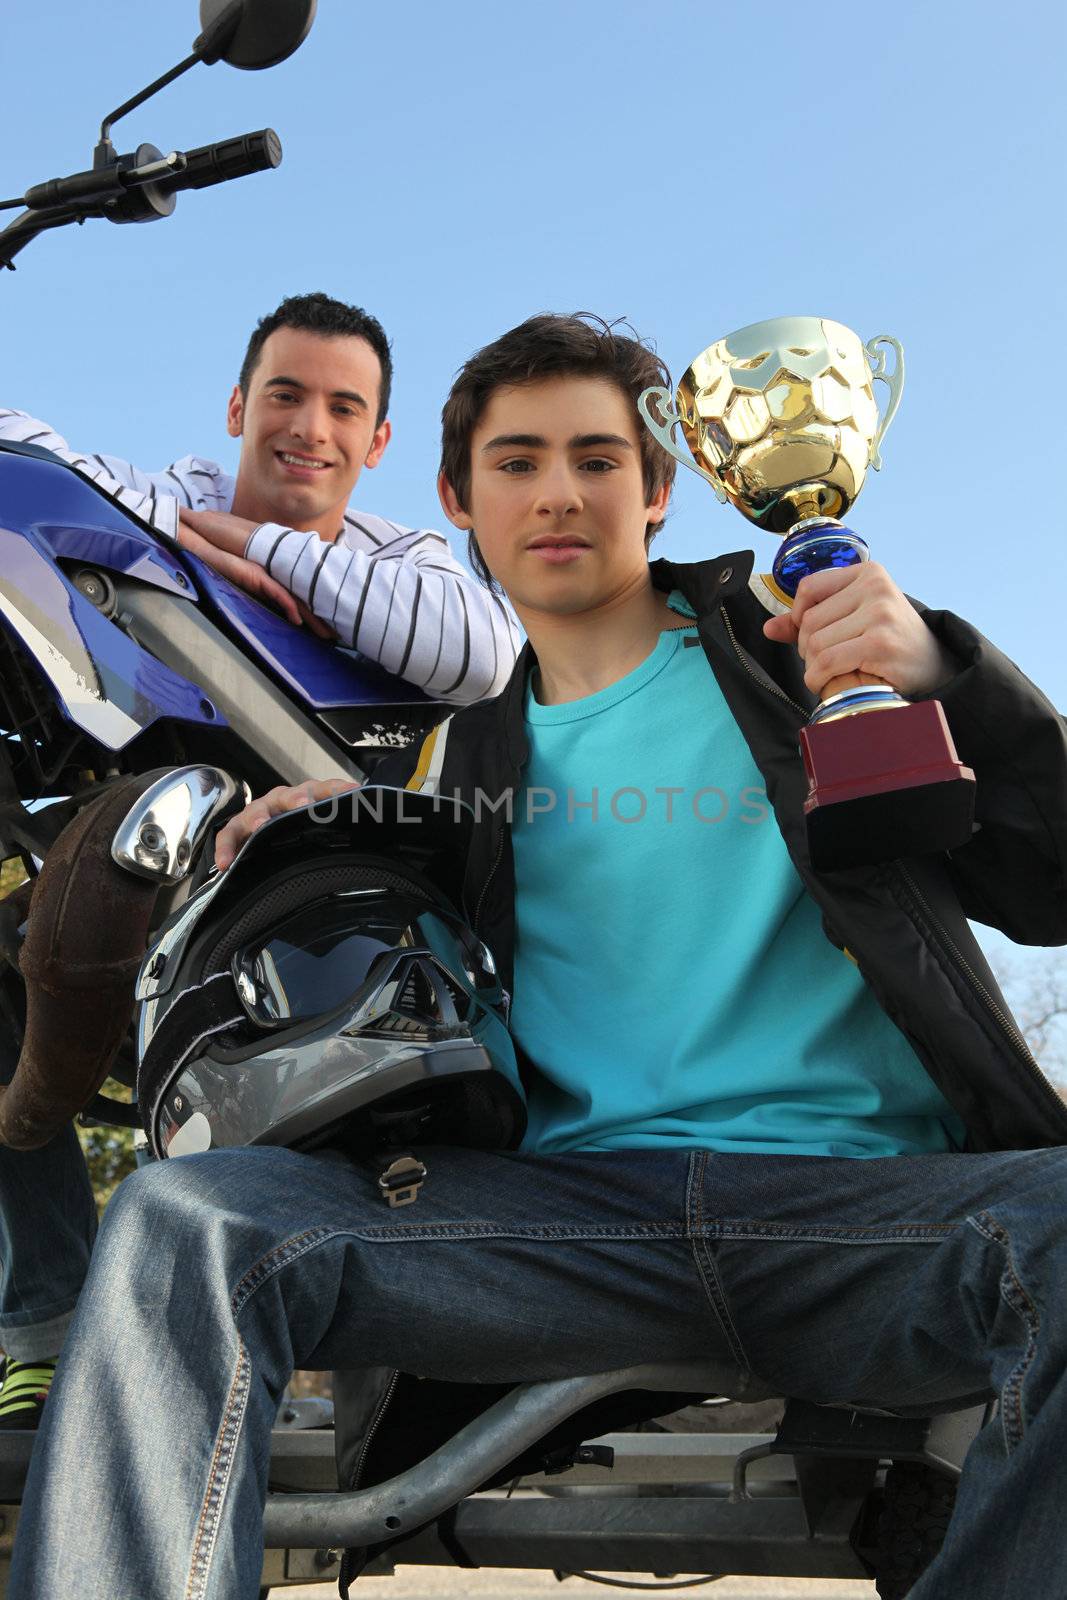 A man with a motorcycle and a trophy.